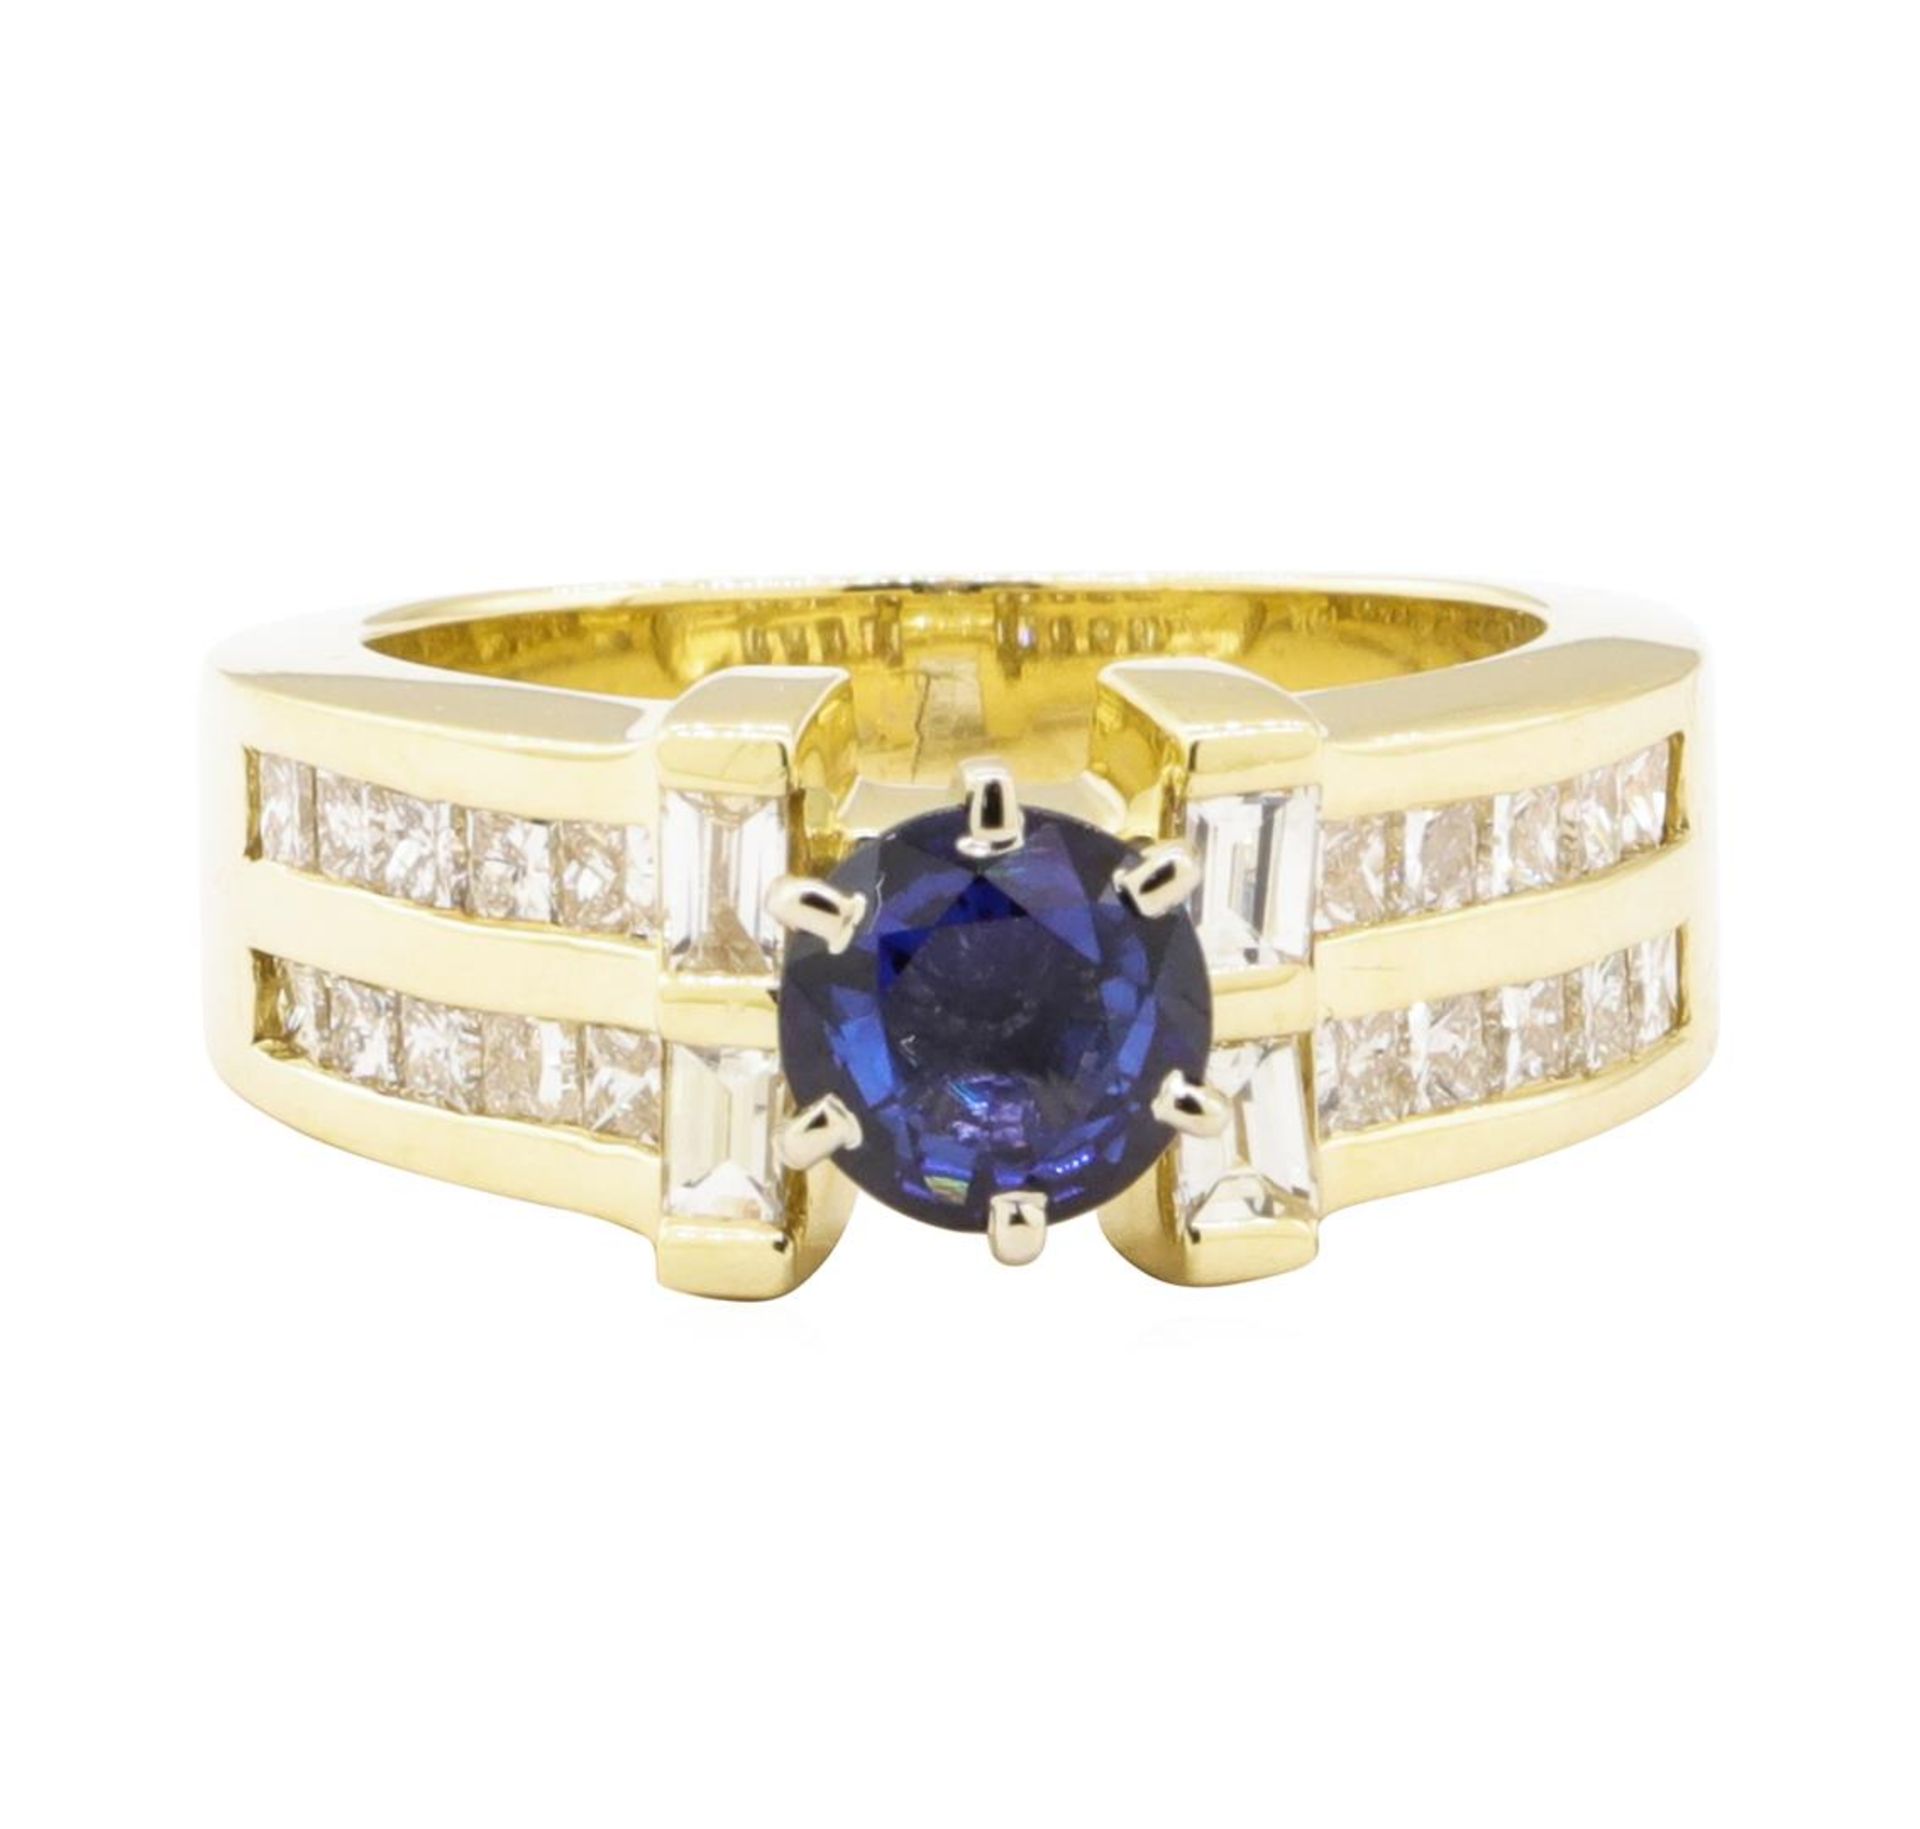 2.05 ctw Blue Sapphire And Diamond Ring - 14KT Yellow Gold - Image 2 of 5